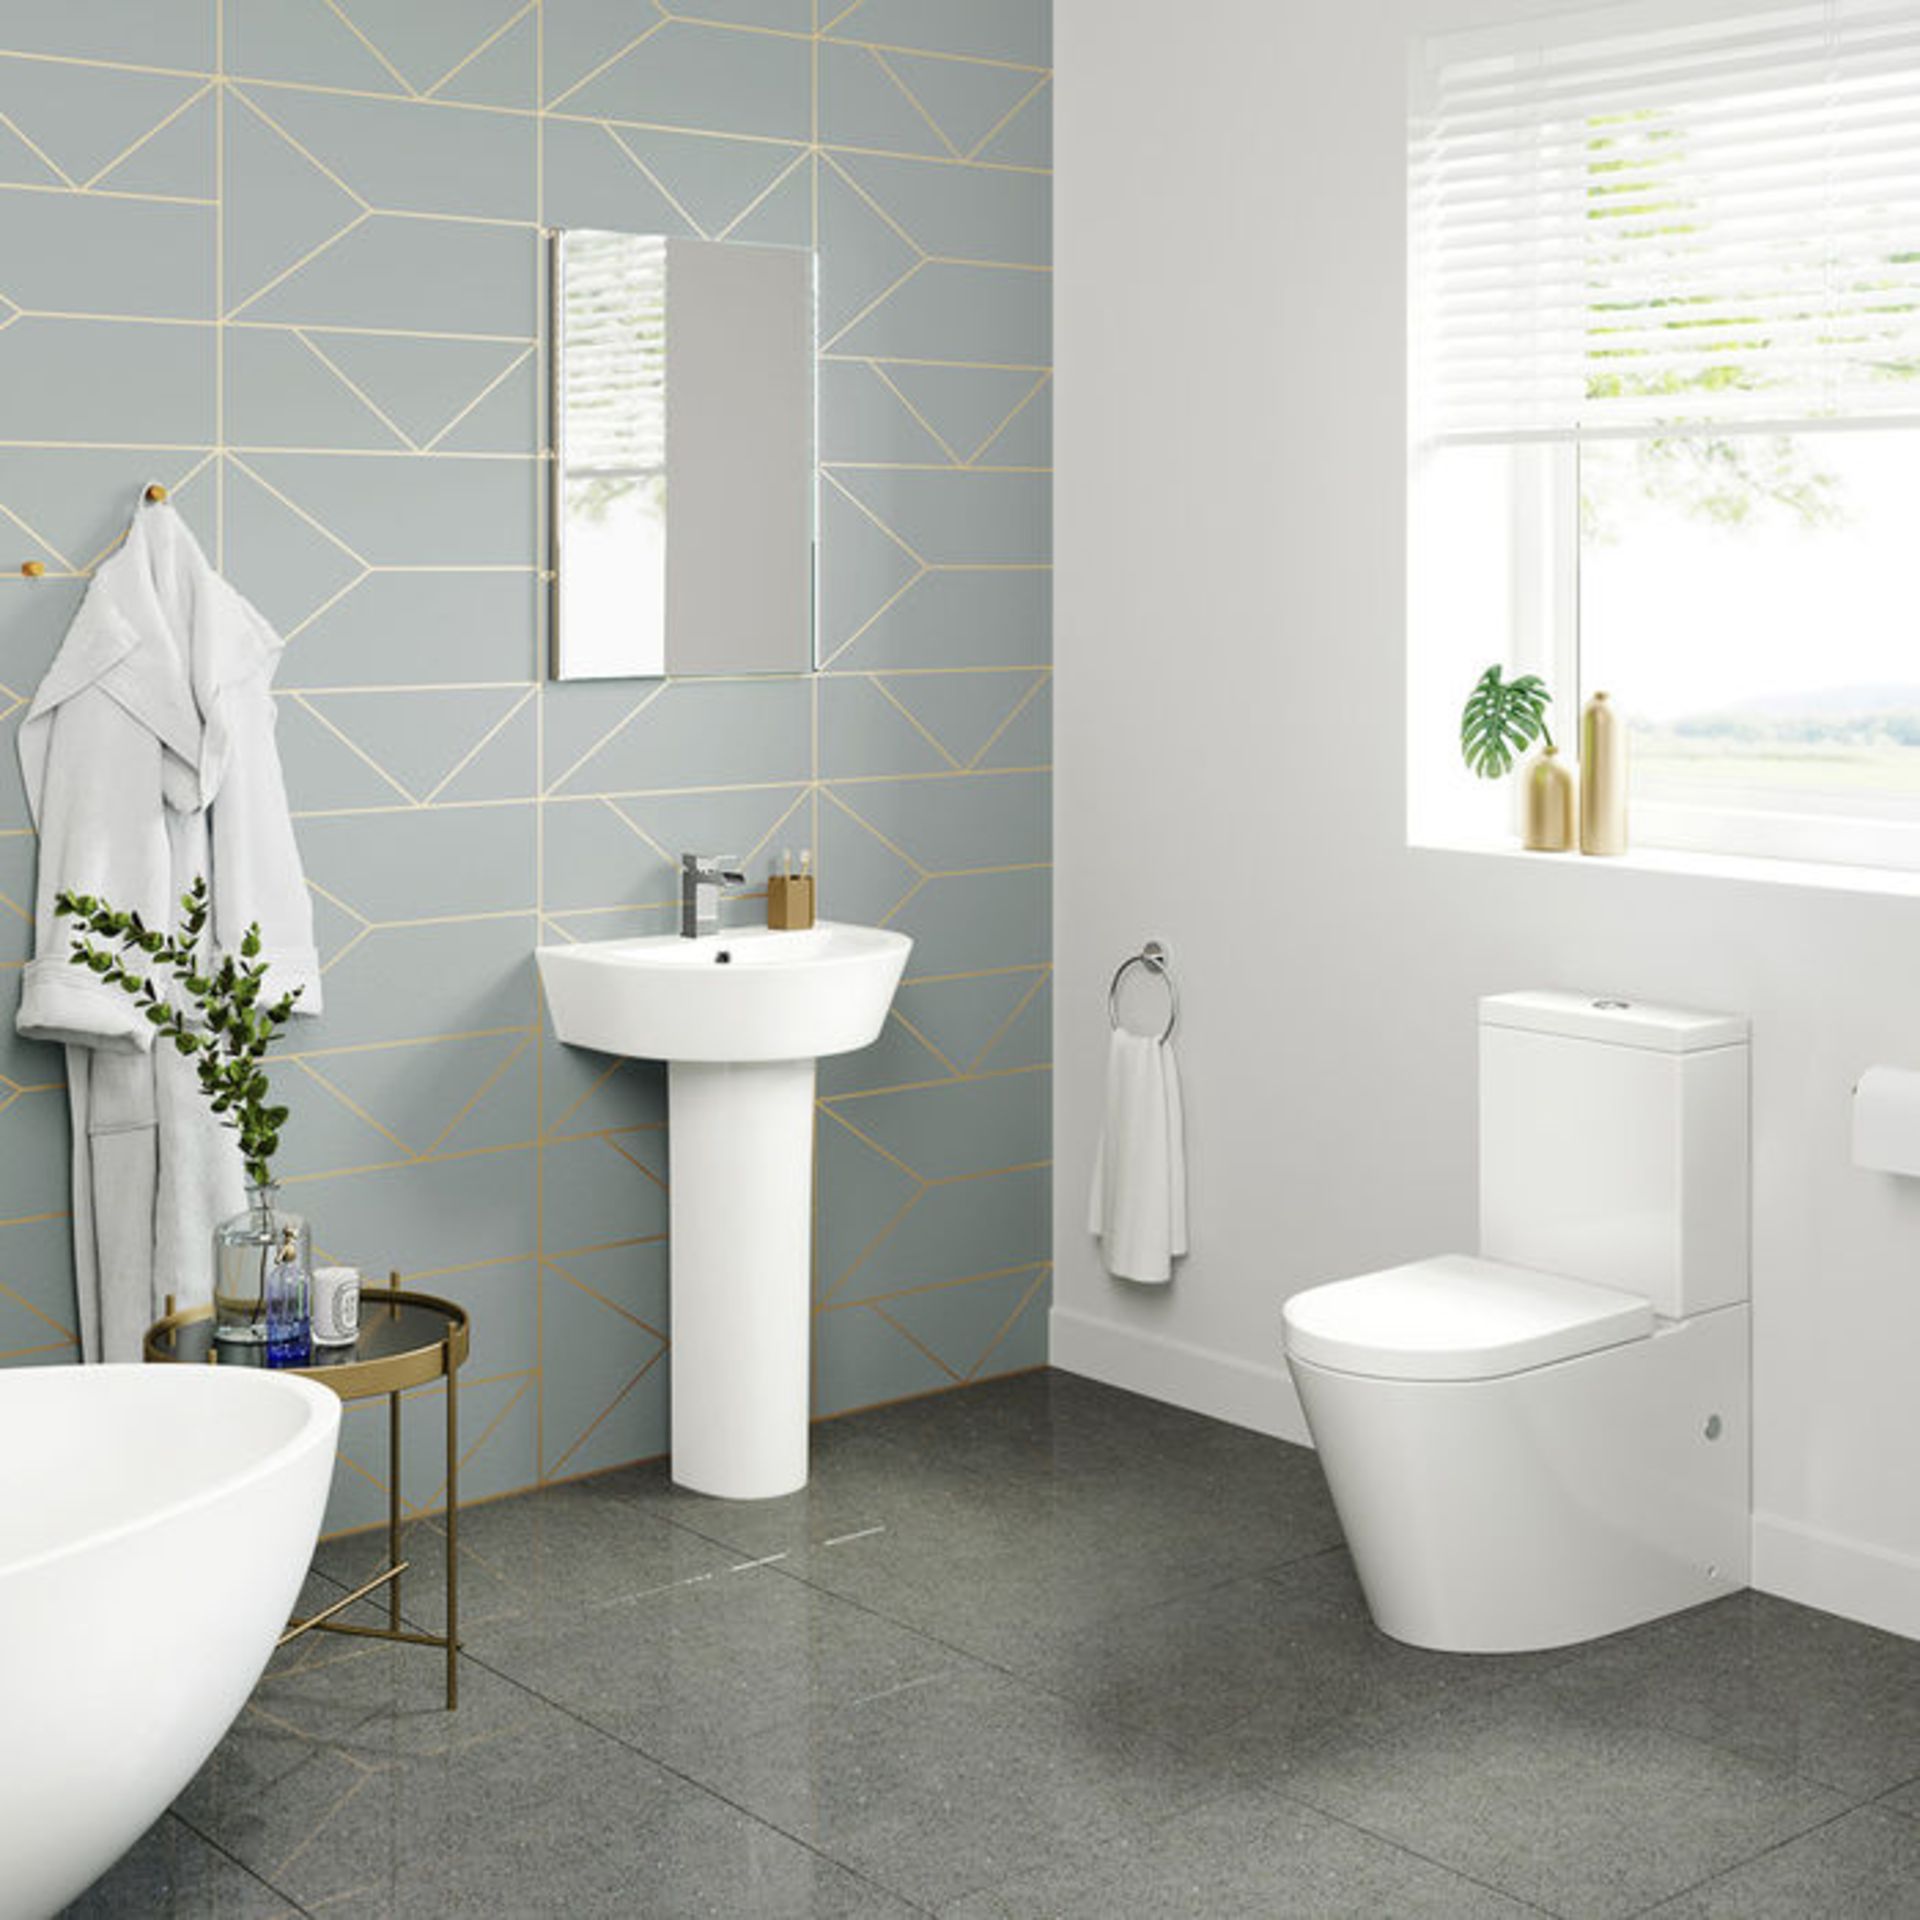 (GR29) Lyon II Close Coupled Toilet & Cistern inc Luxury Soft Close Seat. Lyon is a gorgeous, - Image 2 of 4